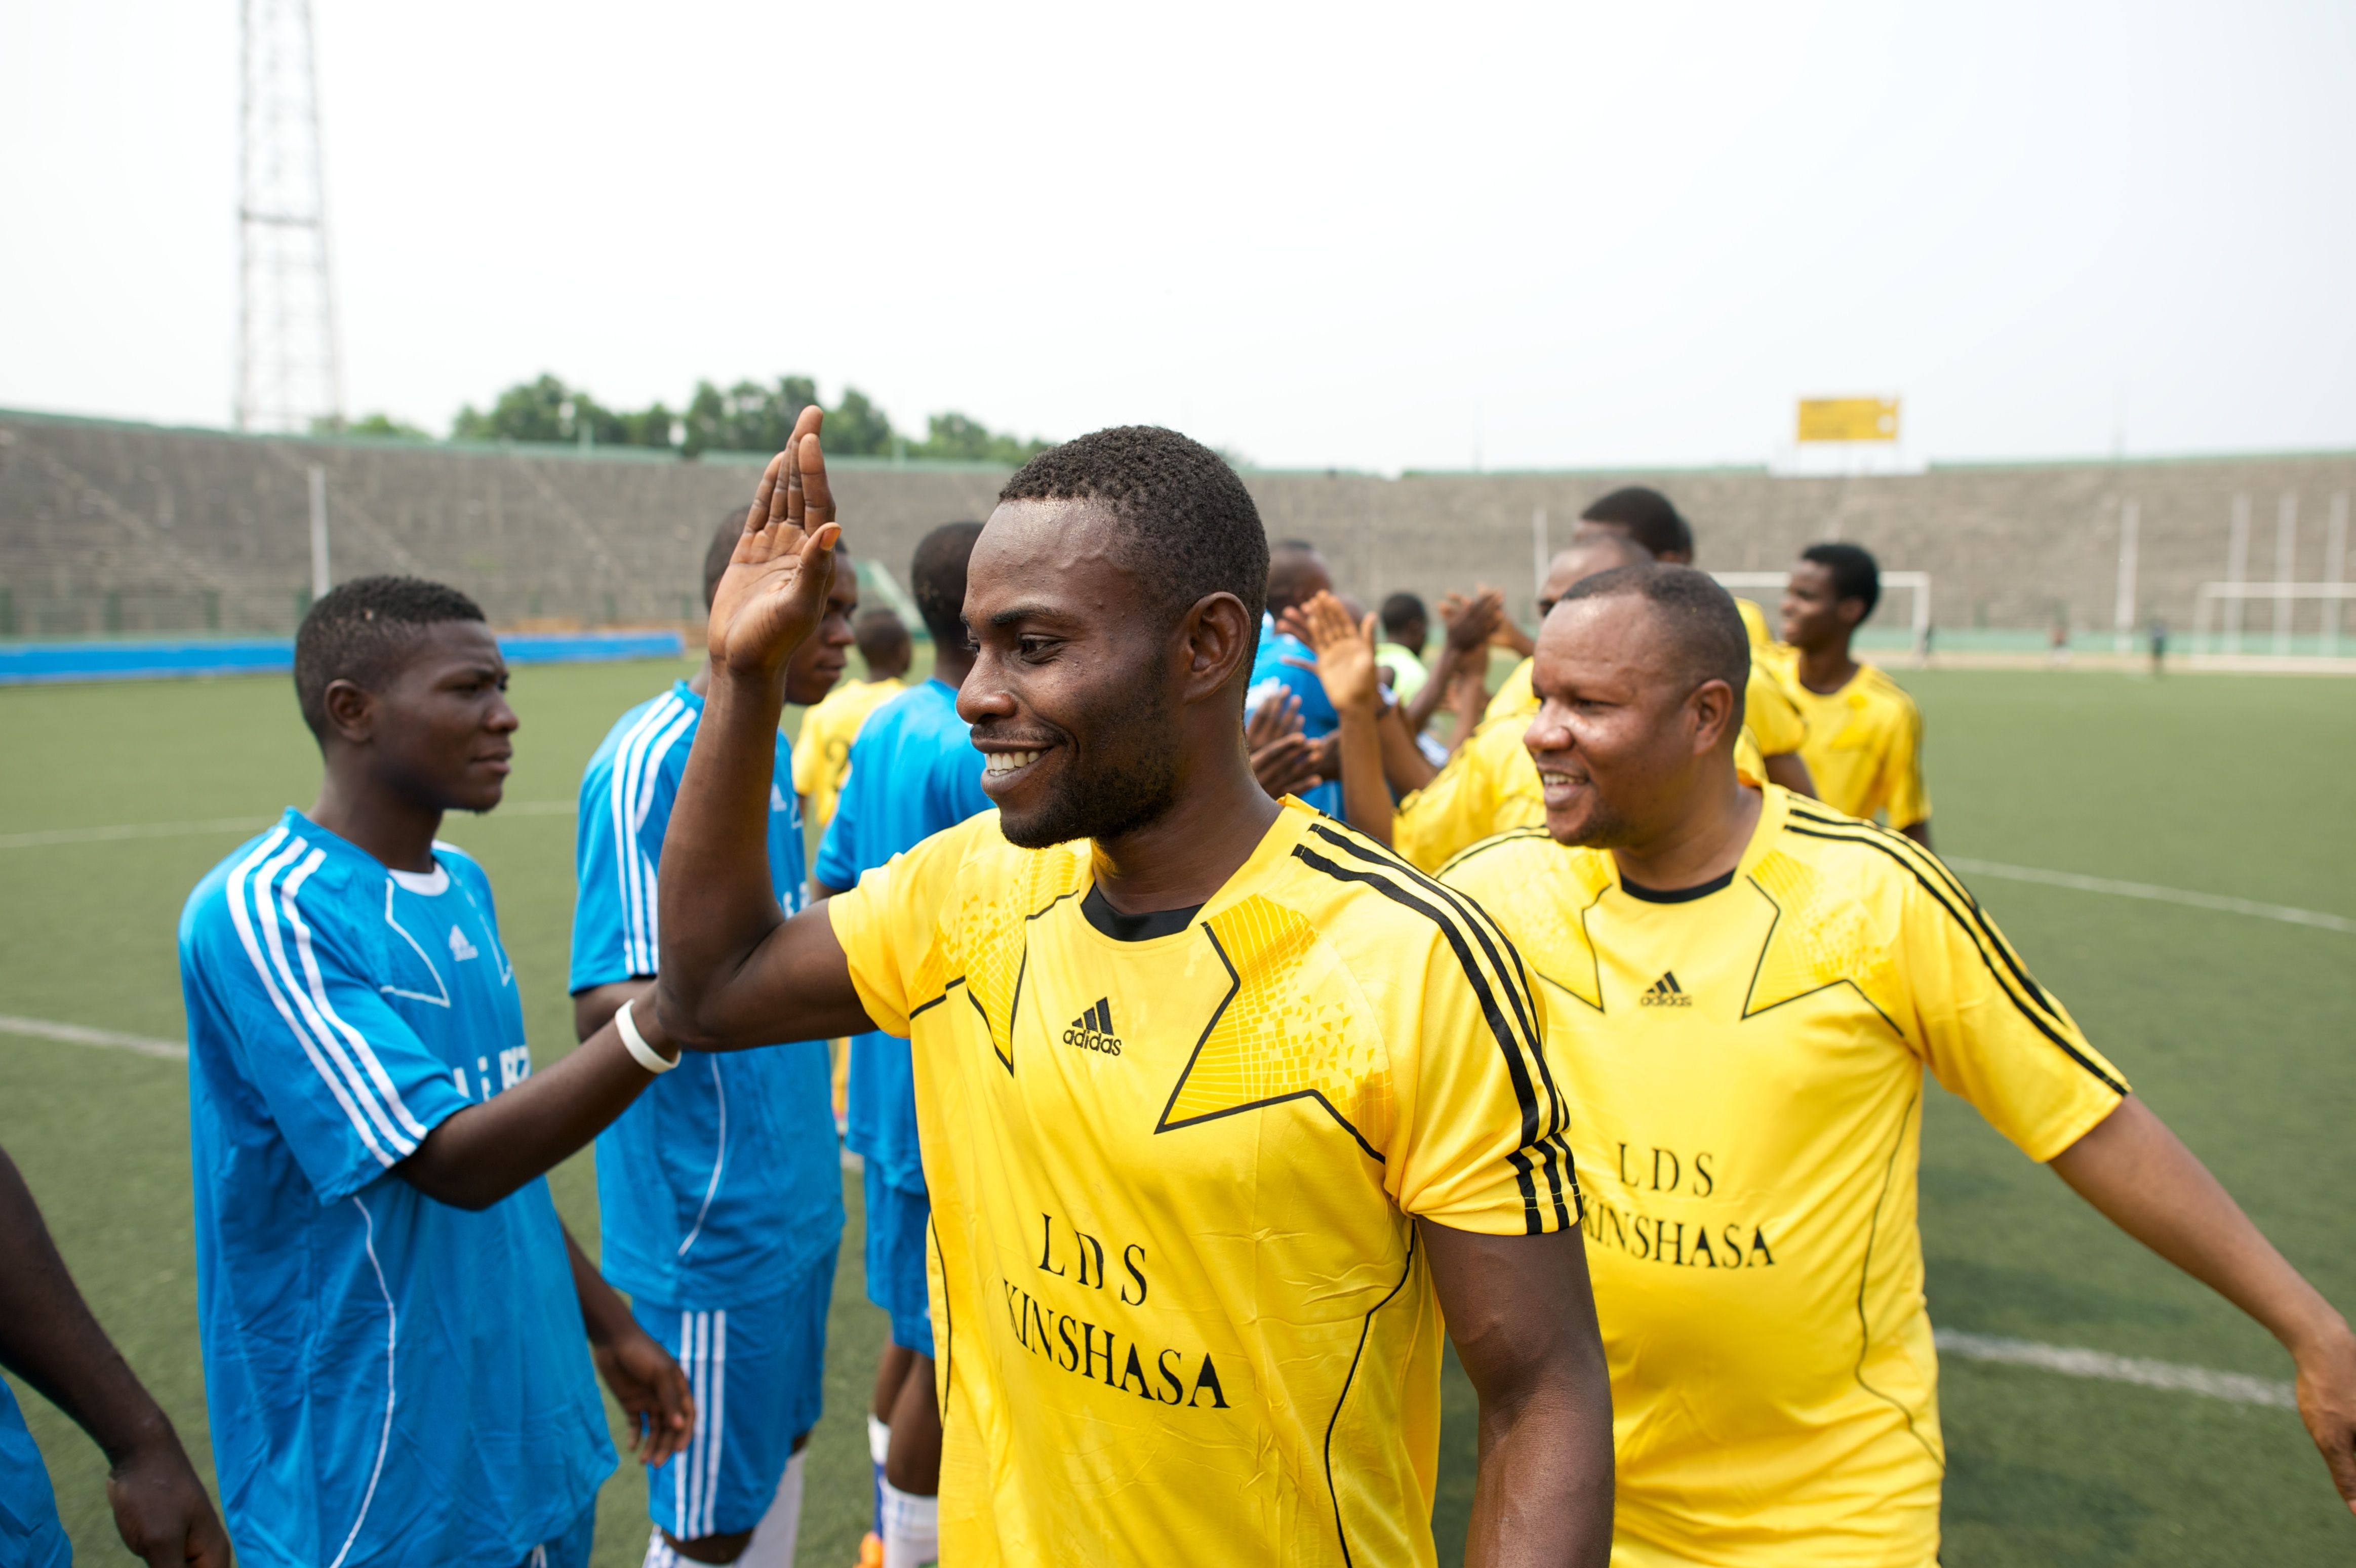 Men from Africa walk in two lines, giving high fives to the opposite team at a soccer game.